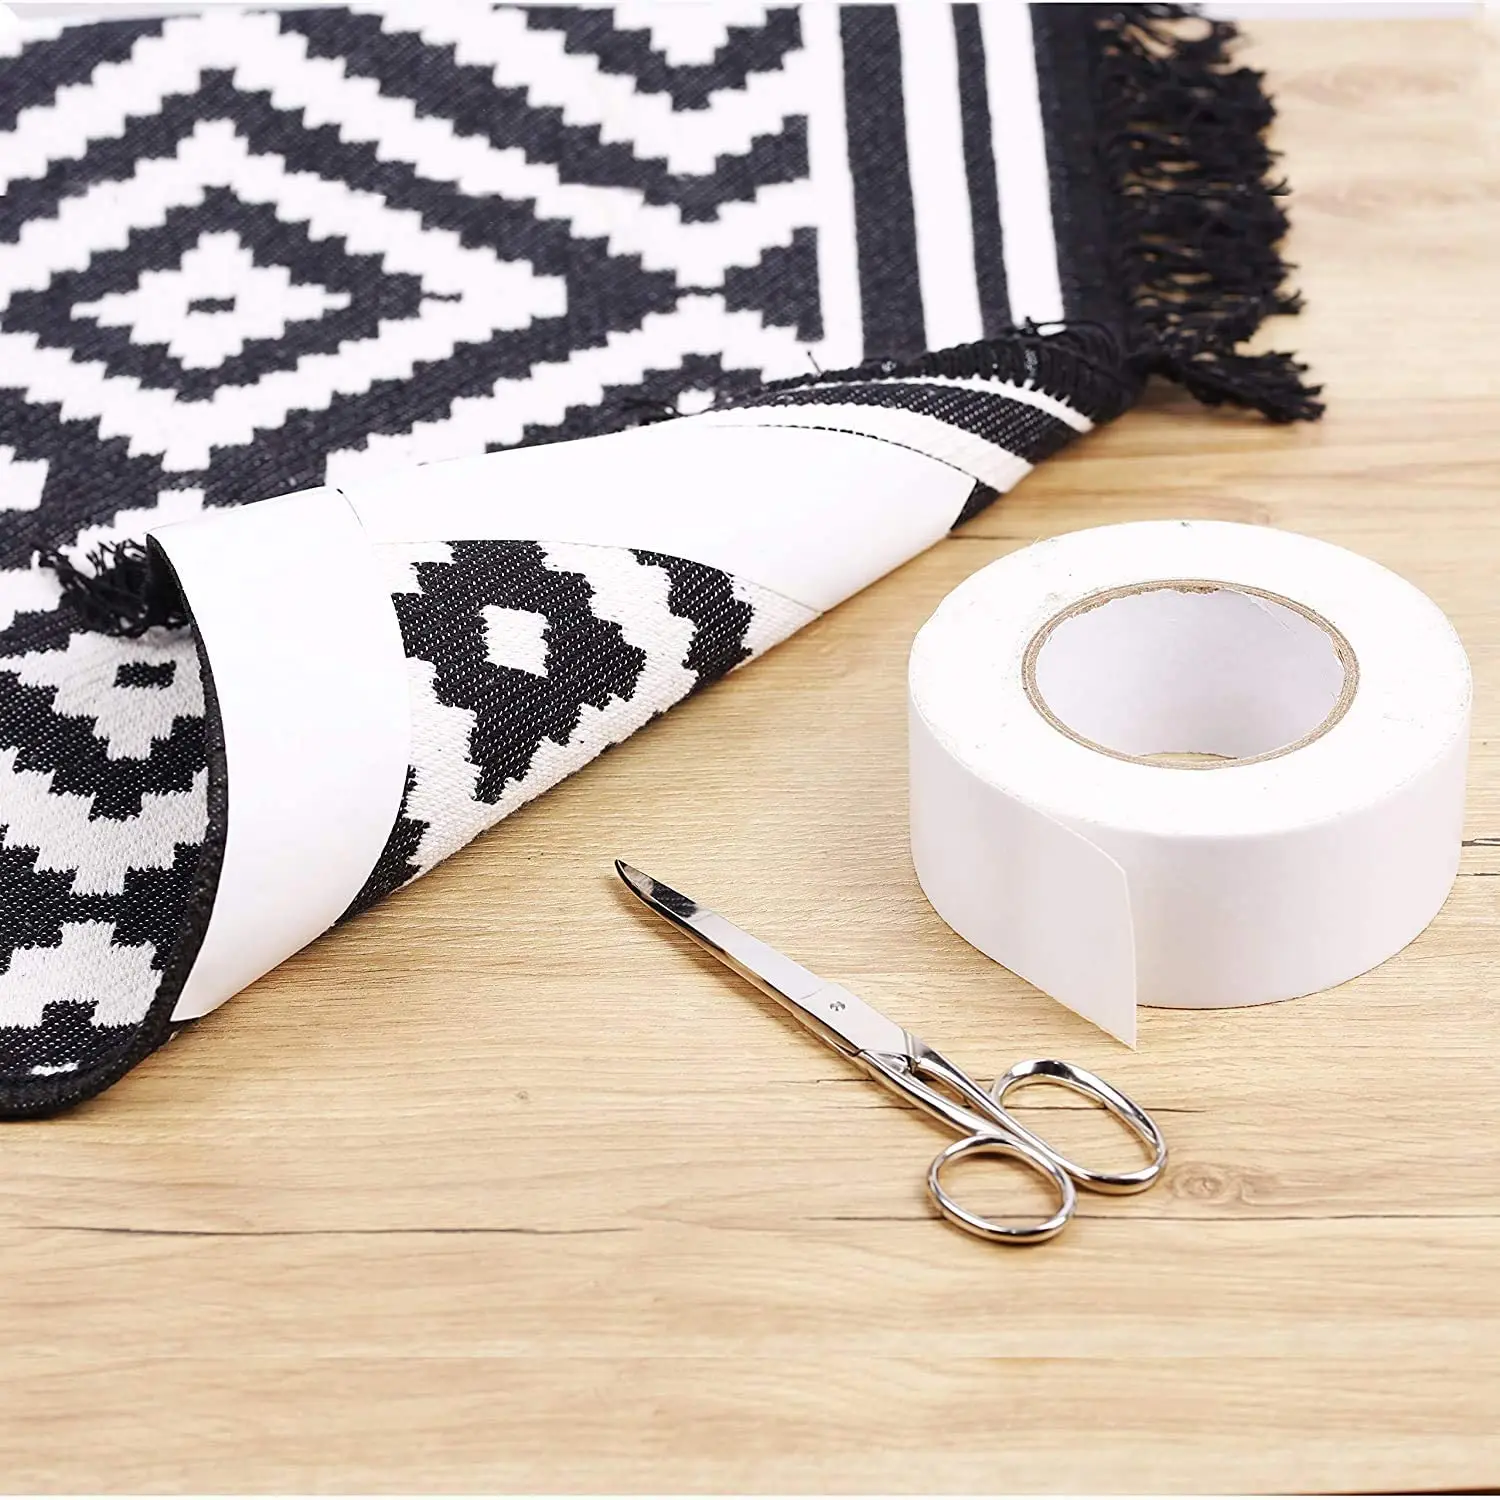 5M Carpet Tape Double Sided Carpet Binding Tape Strong Adhesive and  Removable, Heavy Duty Sticky Tape, Residue Free - AliExpress